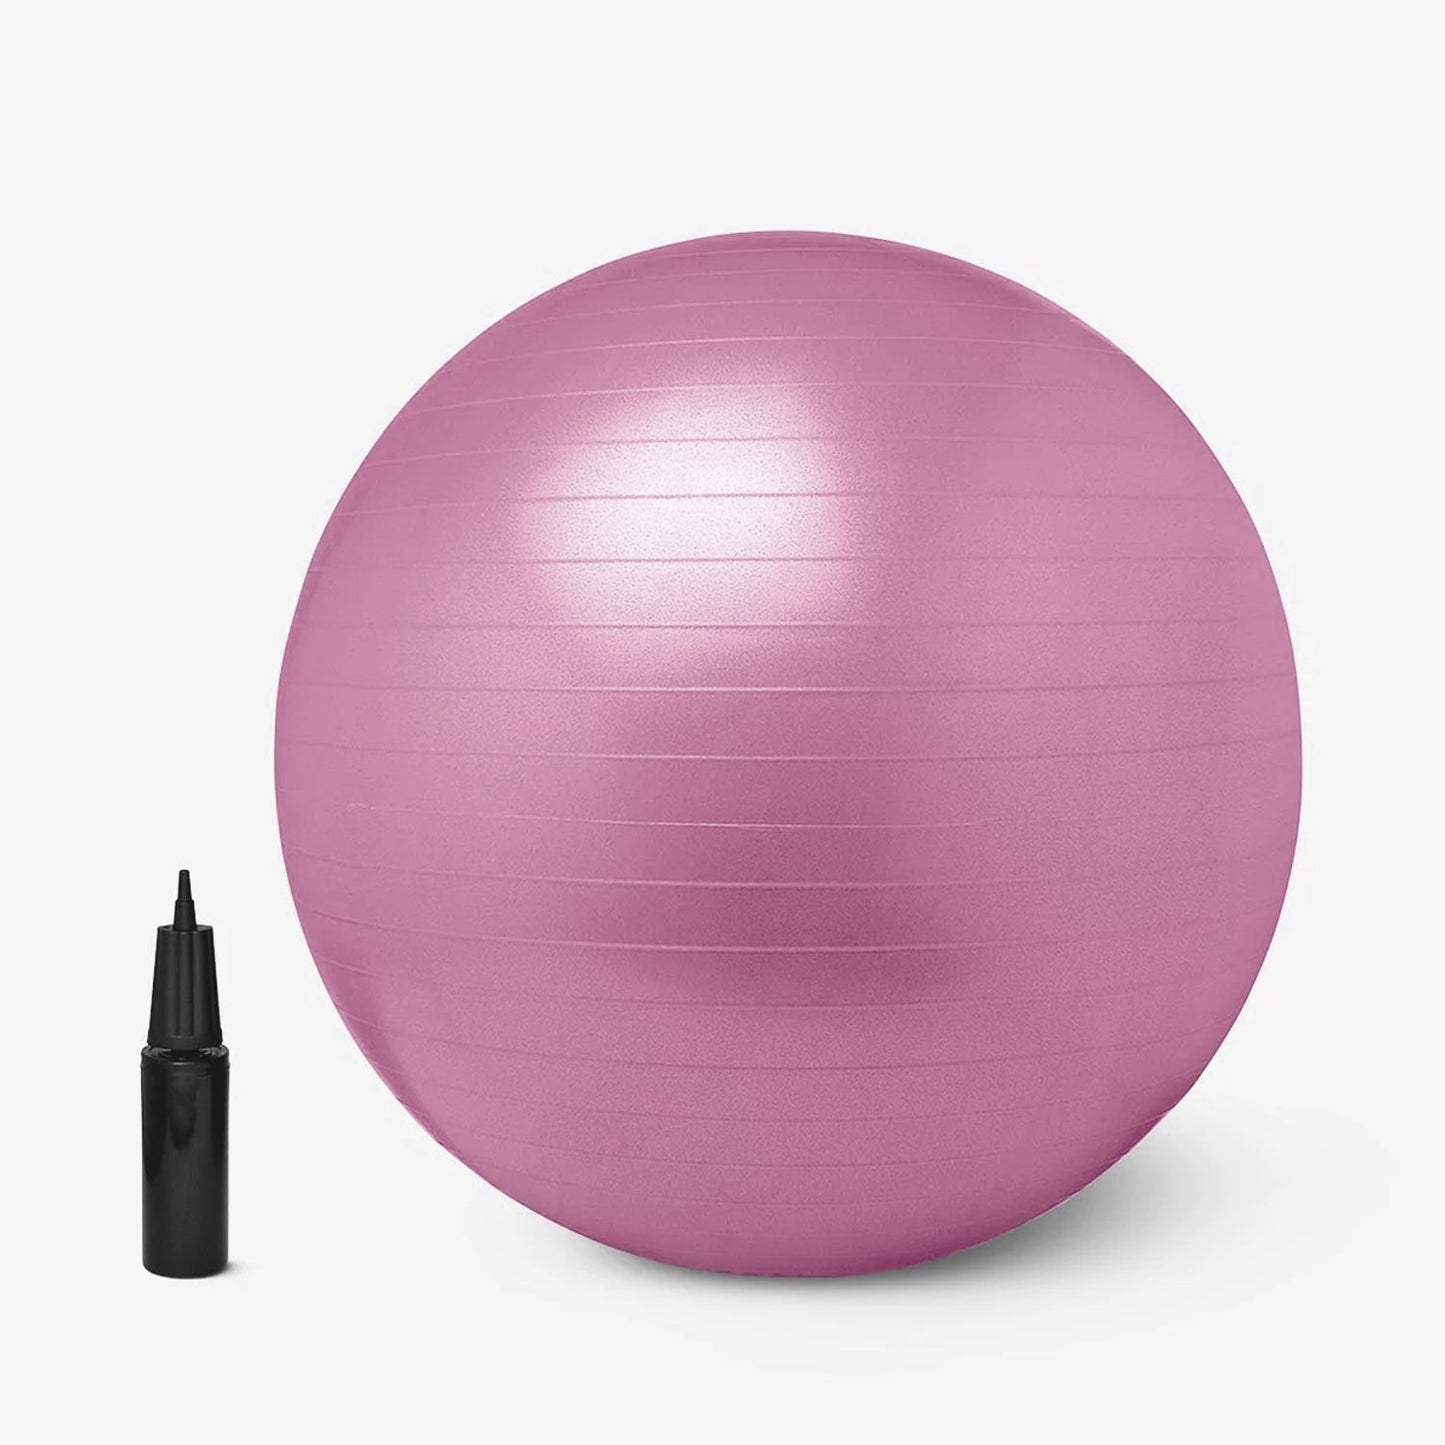 9091 Anti Burst 65 cm Exercise Ball with Inflation Pump, Non-Slip Gym Ball, for Yoga, Pilates, Core Training Exercises at Home and Gym- Suitable for Men and Women - deal99.in